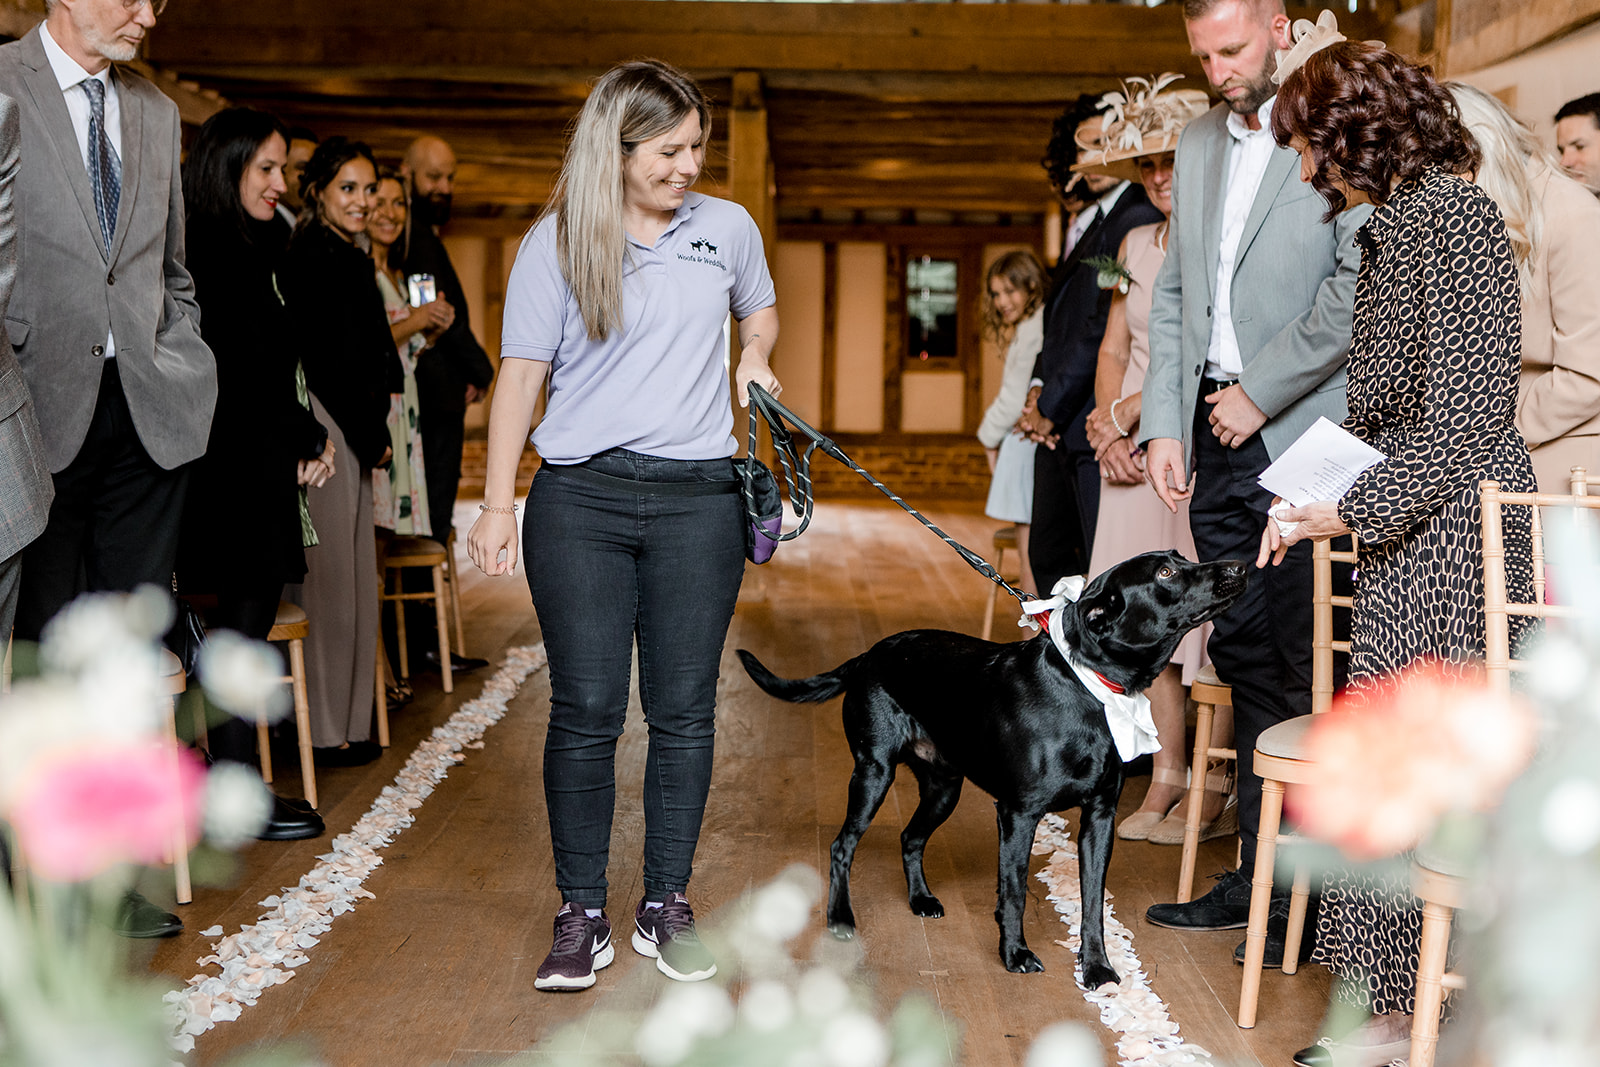 the wedding couple's dog as the ring bearer